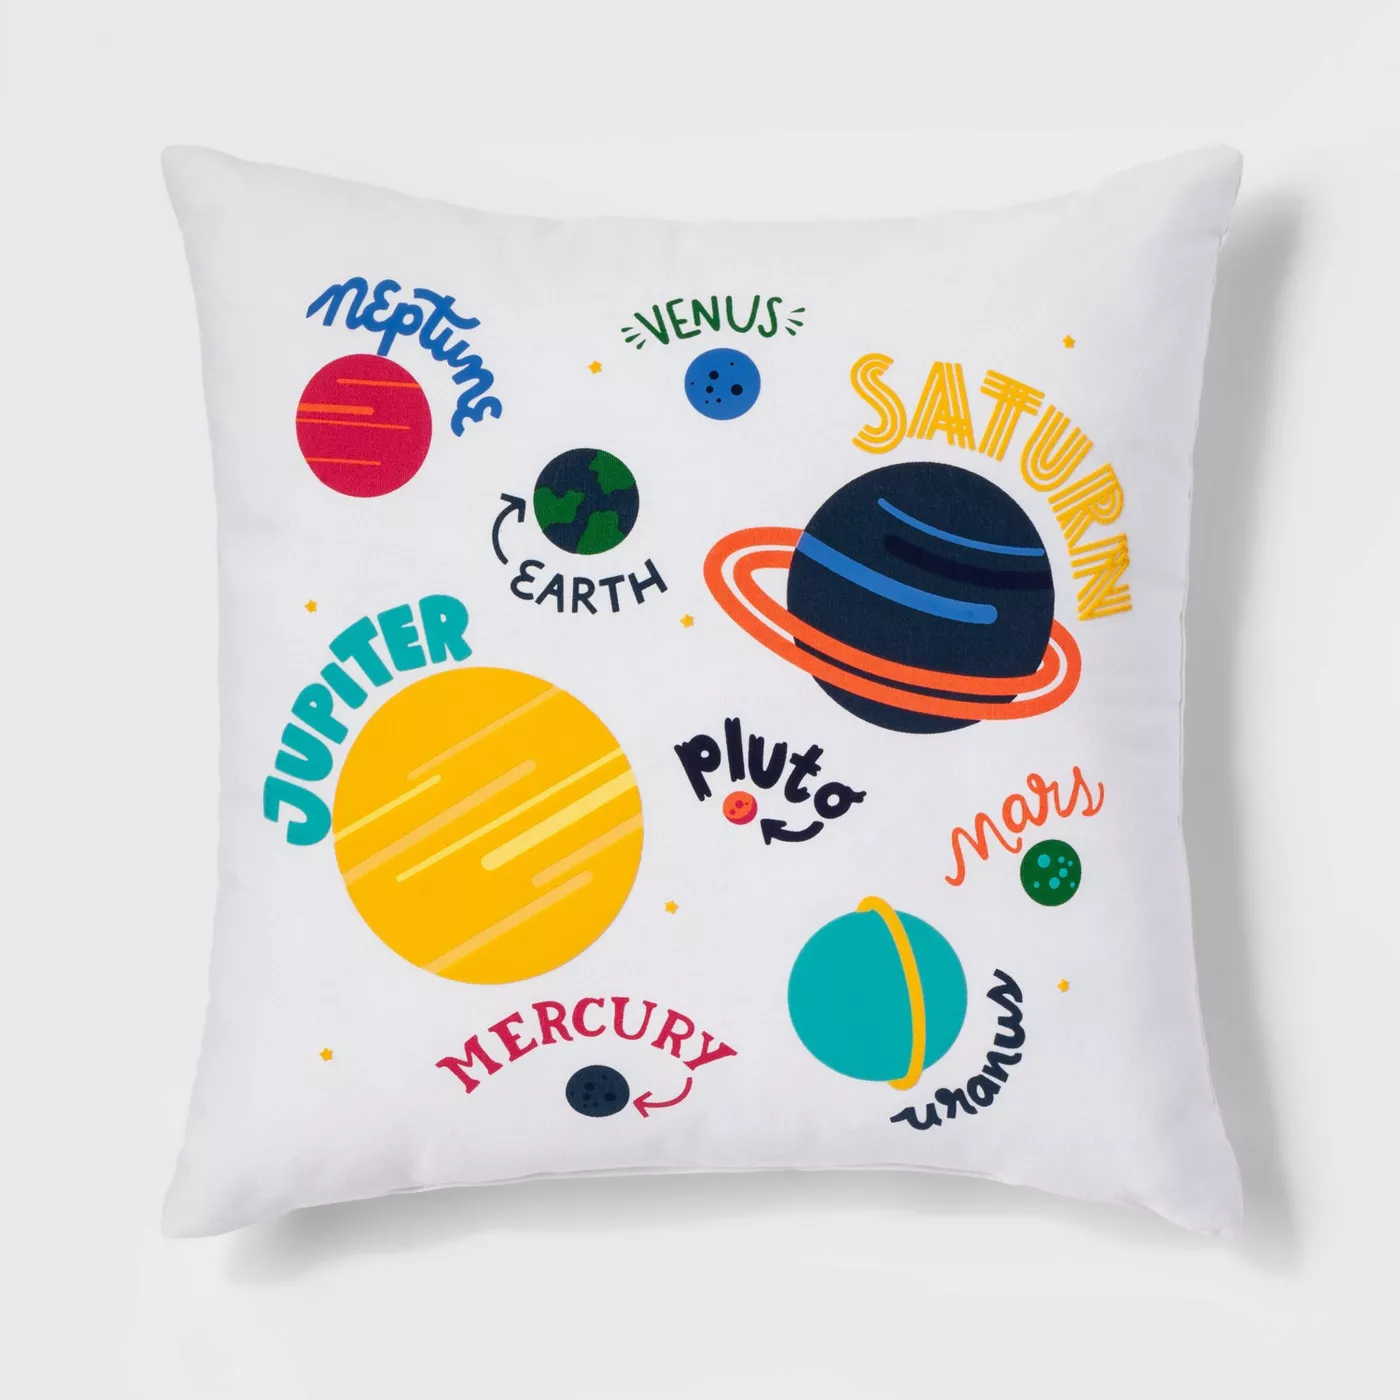 Planets Throw Pillow - Pillowfort™ - image 1 of 8